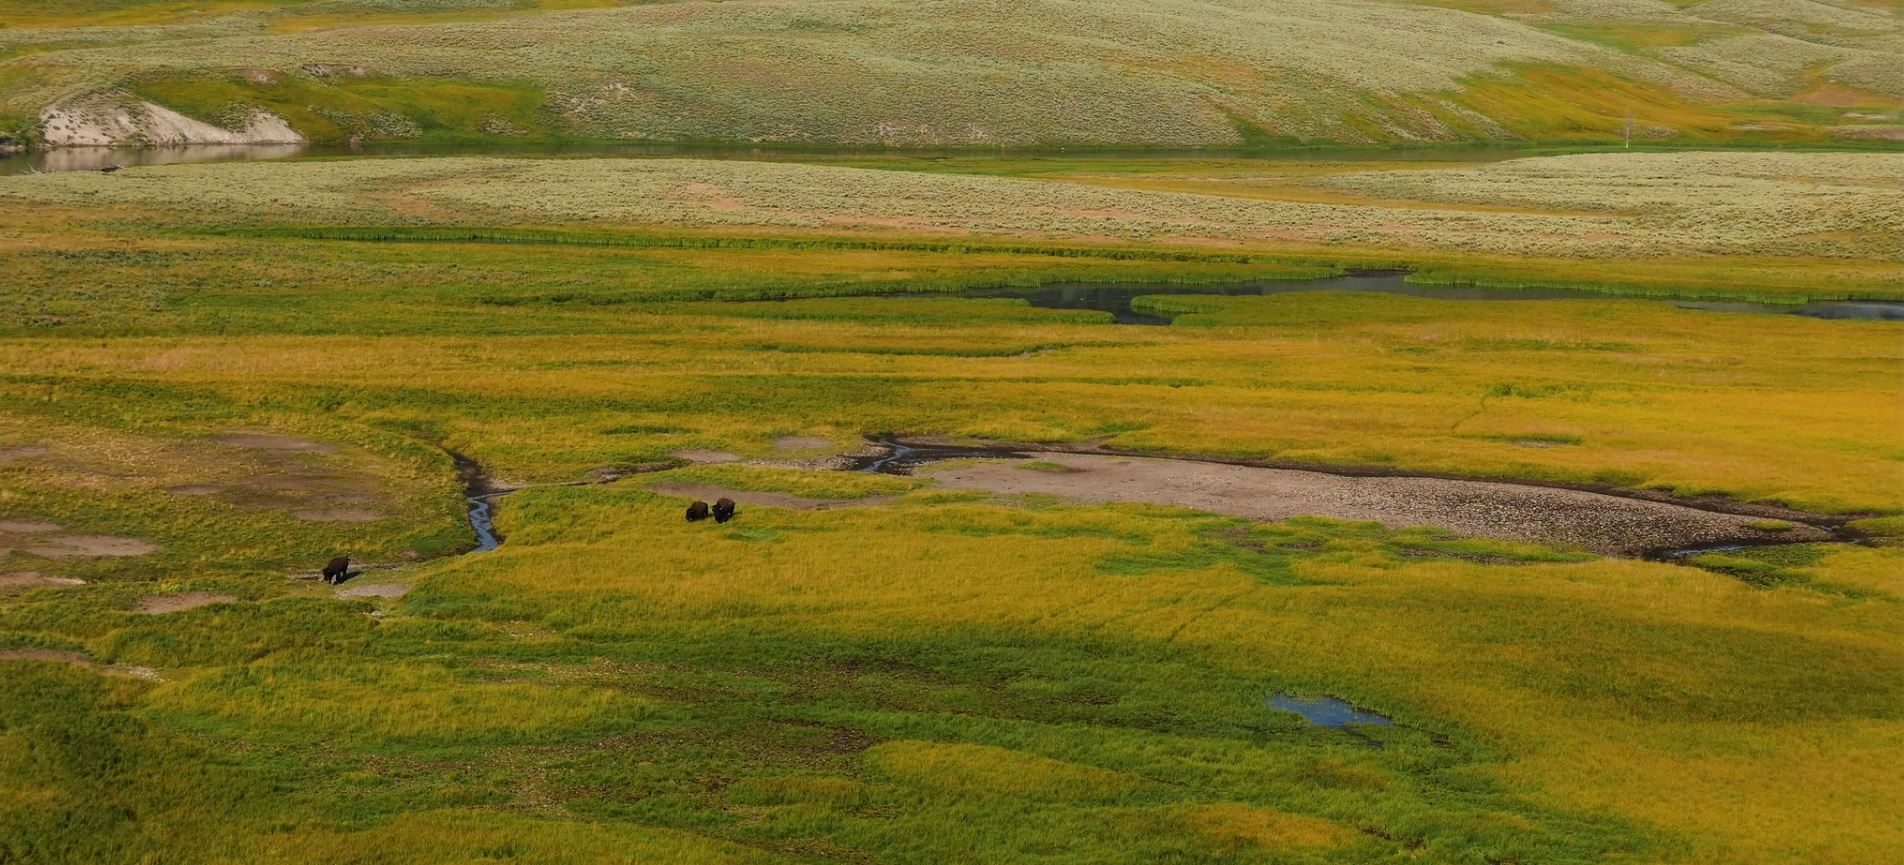 This image shows bisons grazing at Yellowstone National Park